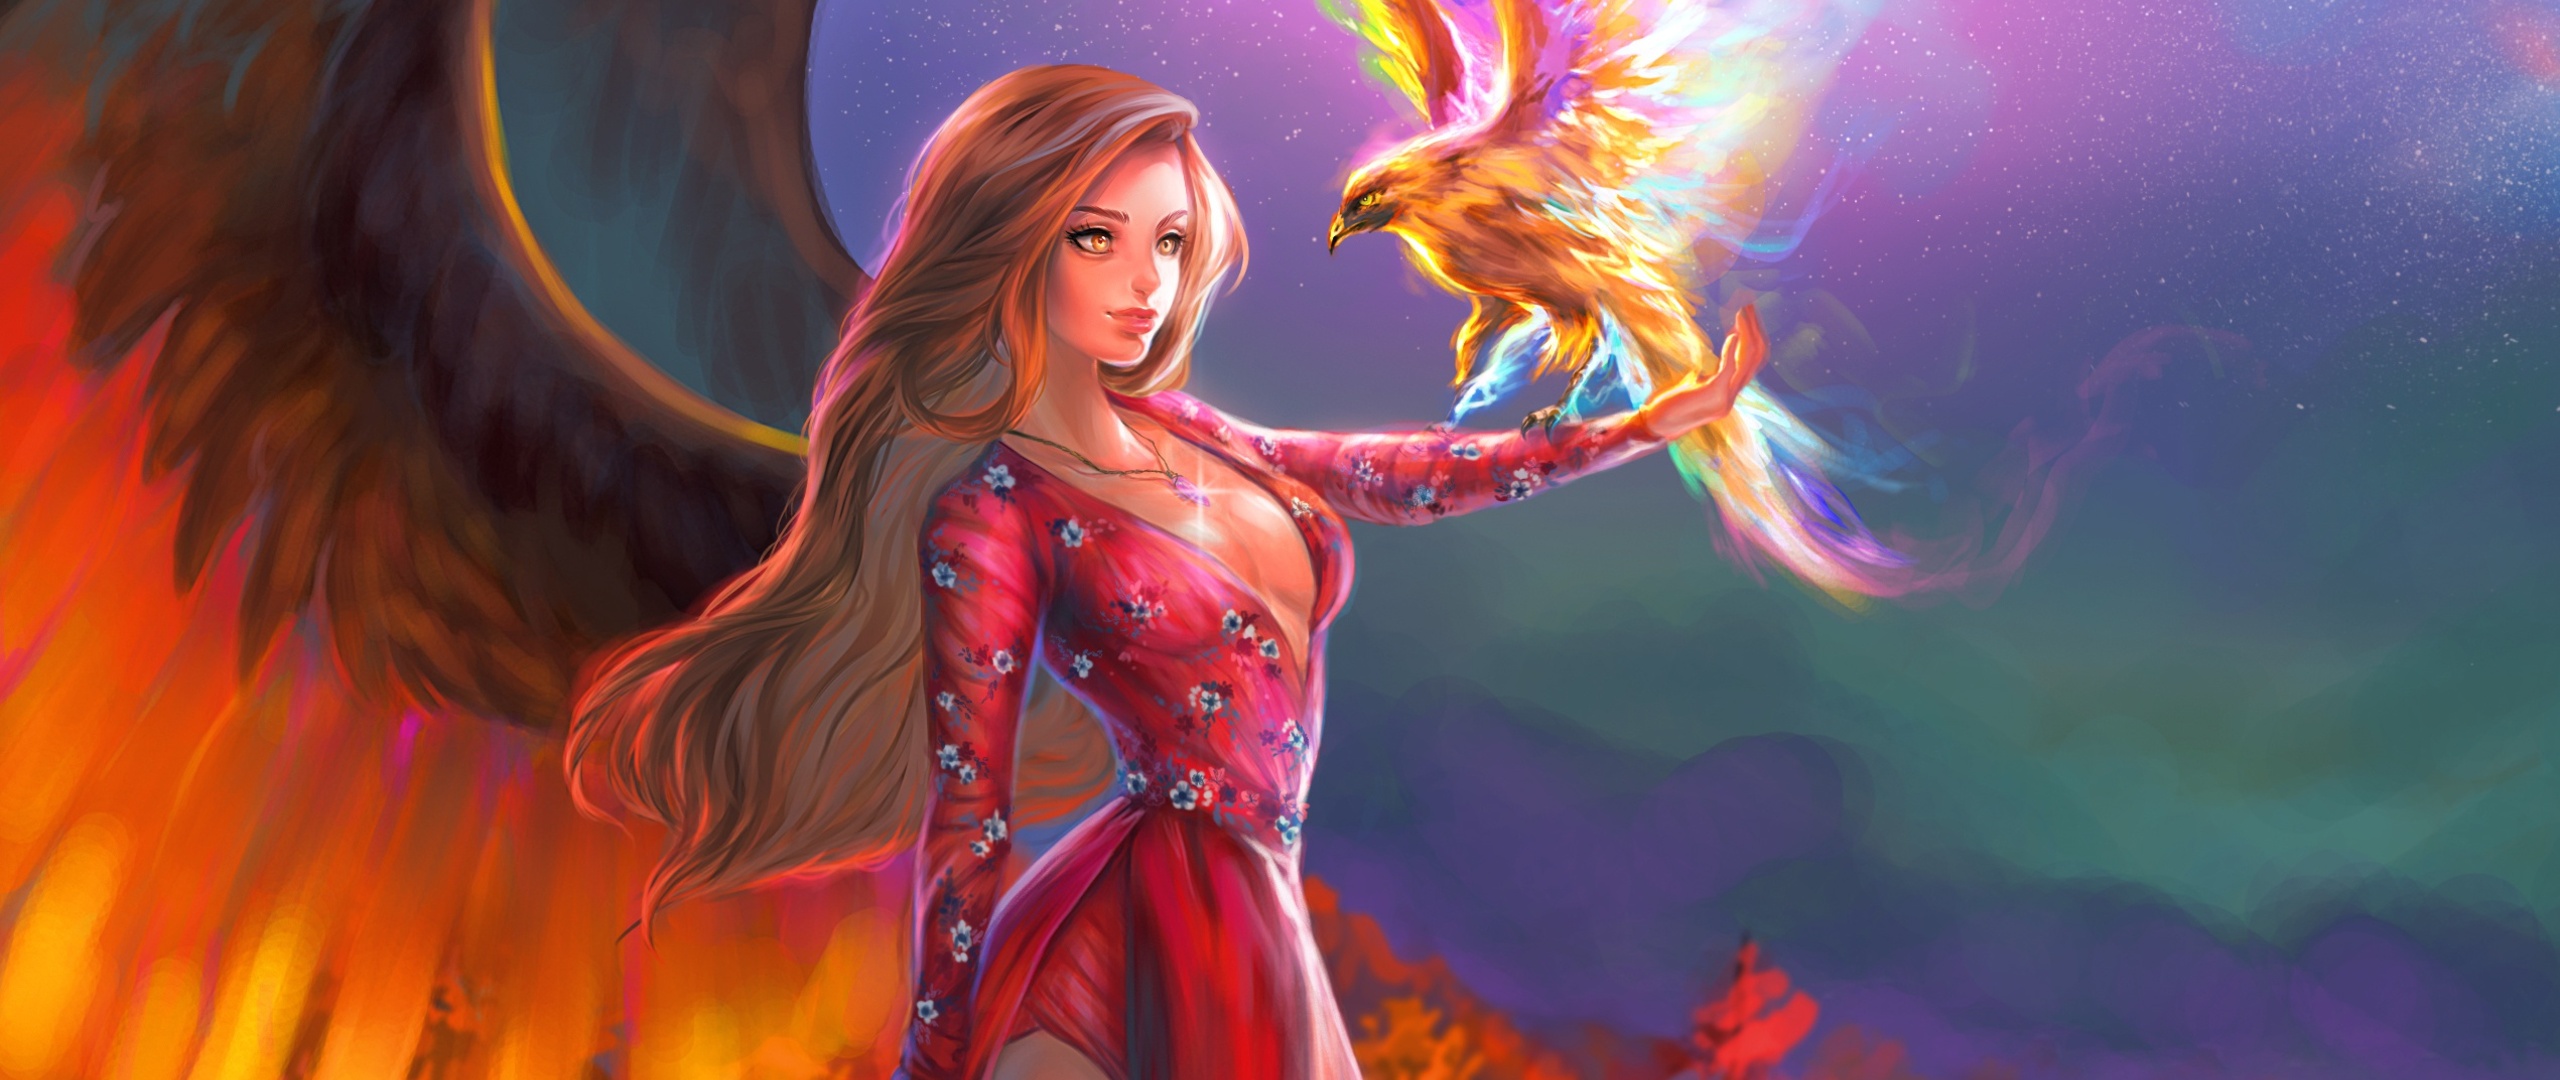 Fantasy Girl With Phoenix In 2560x1080 Resolution. fantasy-girl-with-phoeni...